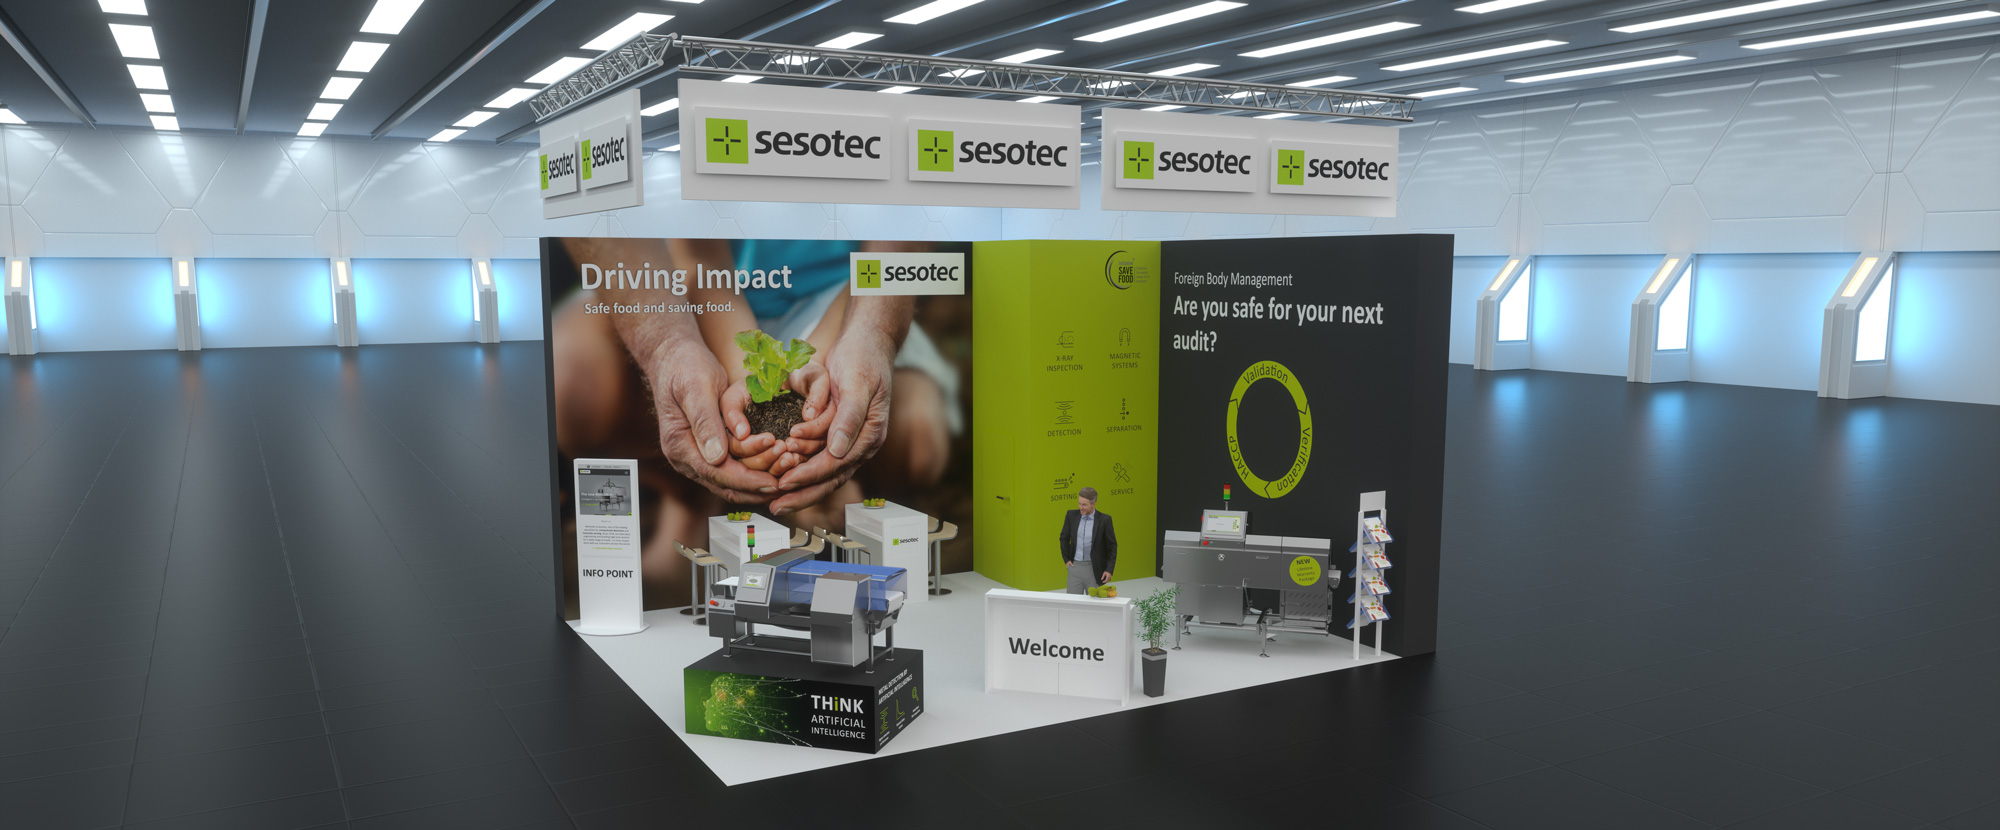 Virtual Food Safety Exhibition Stand 2020